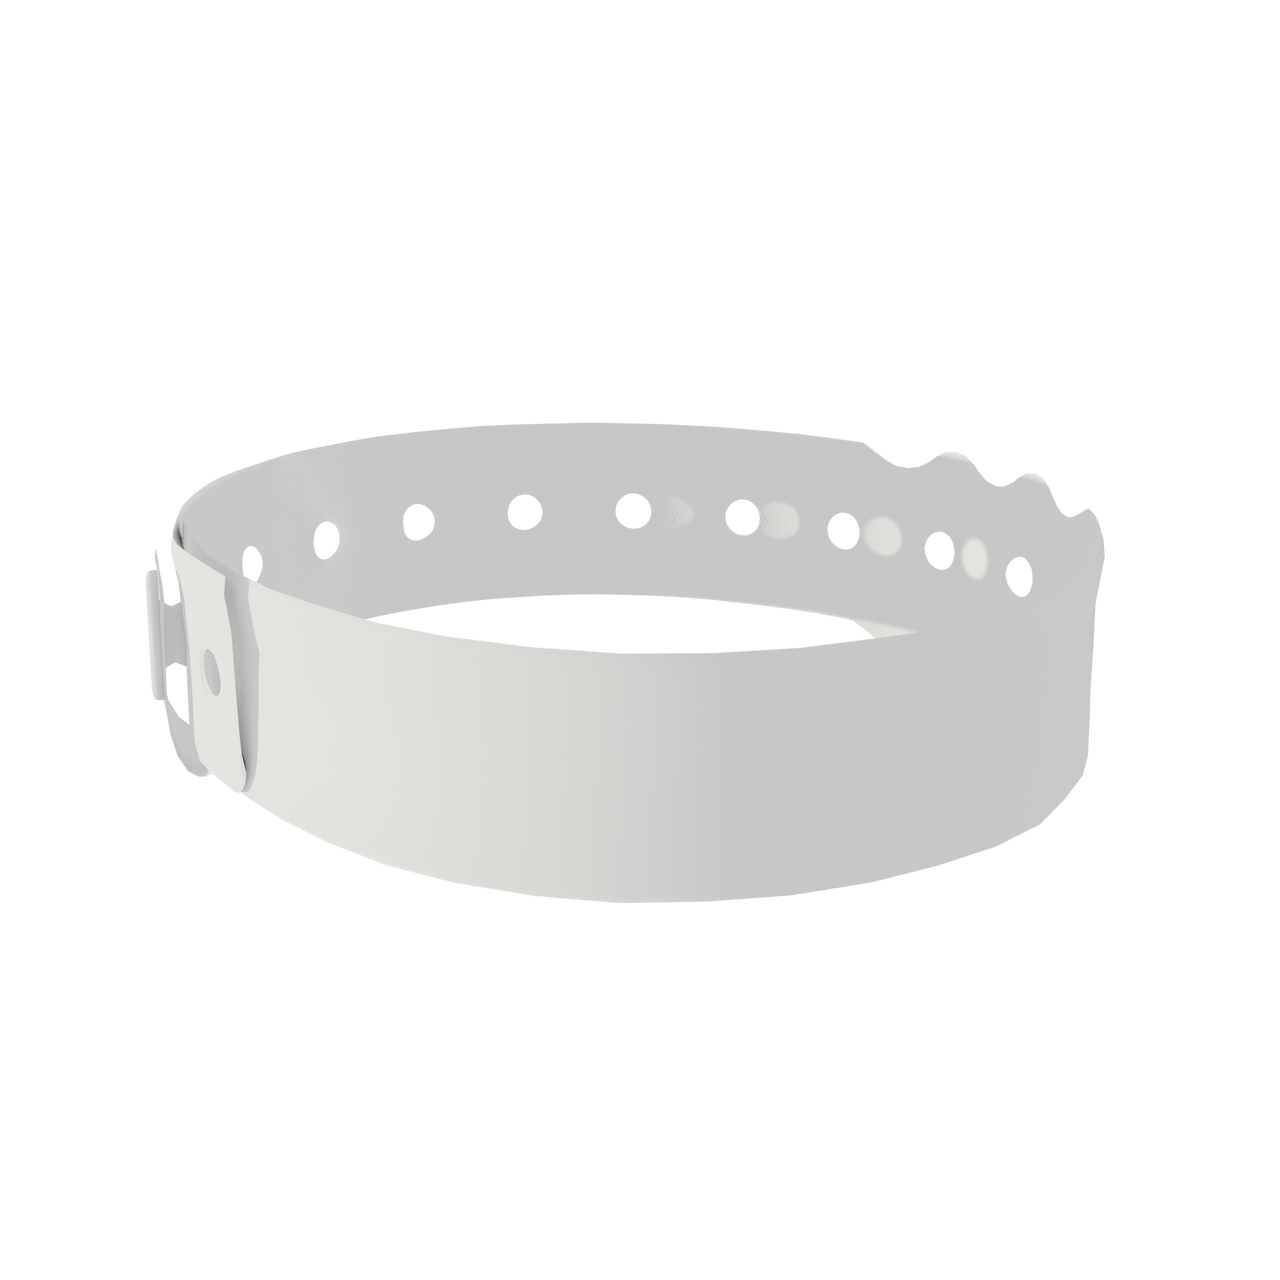 A Soft Comfort L-Shape Snapped Solid Pantone Green wristband